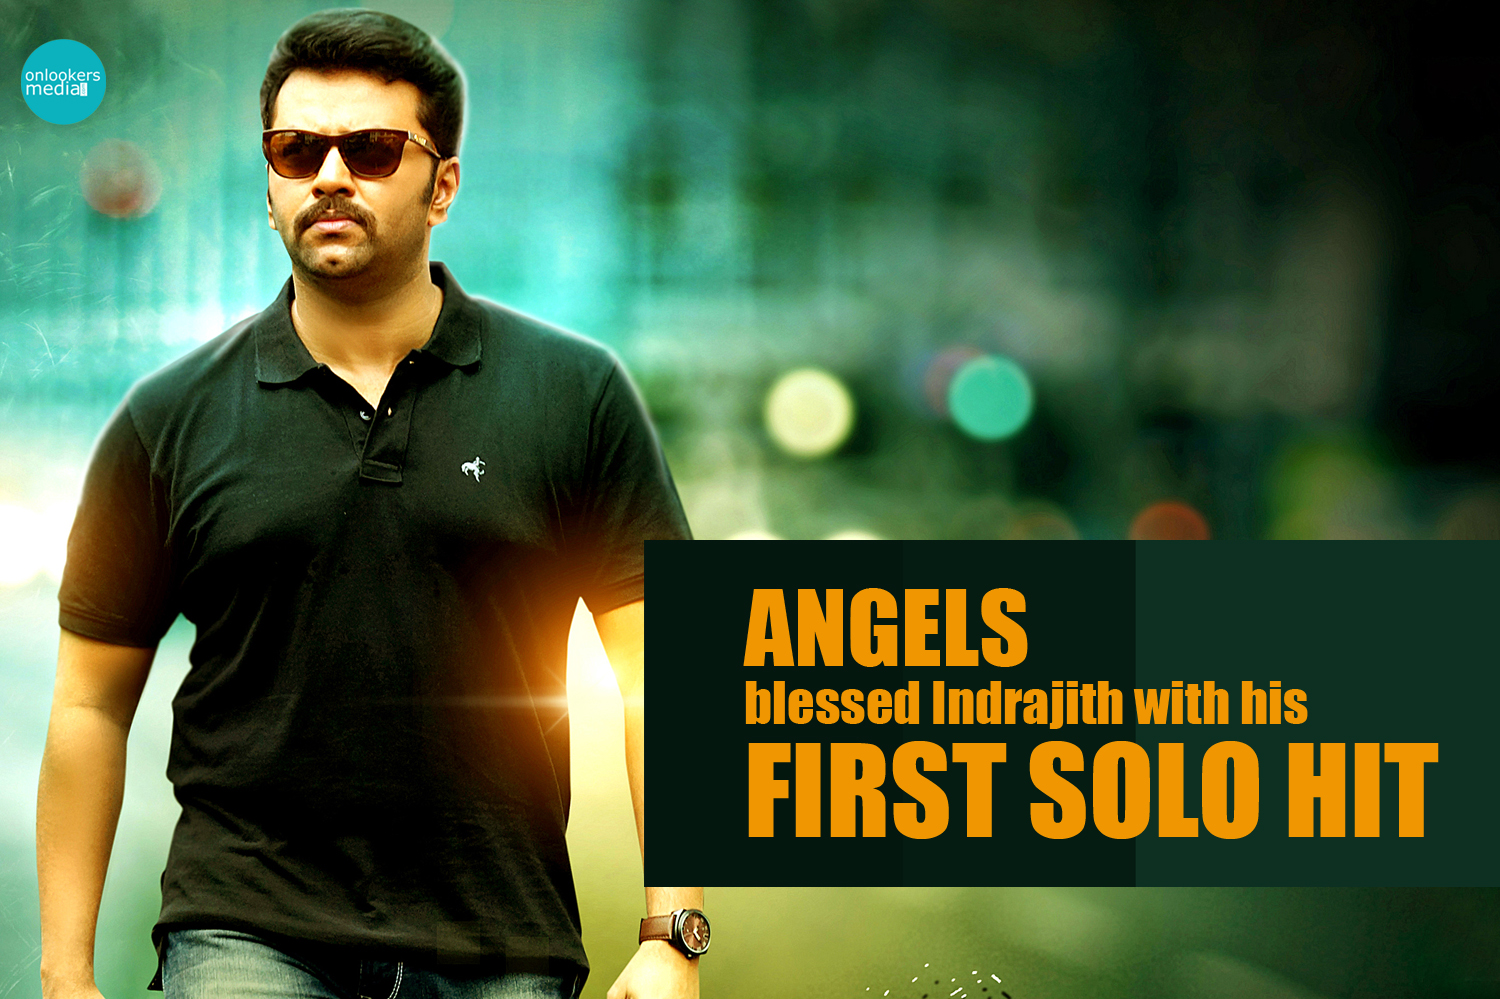 Angels-blessed-Indrajith-with-his-first-solo-hit-Angels-Malayalam-Movie-Review-Report-Collection-Onlookers-Media